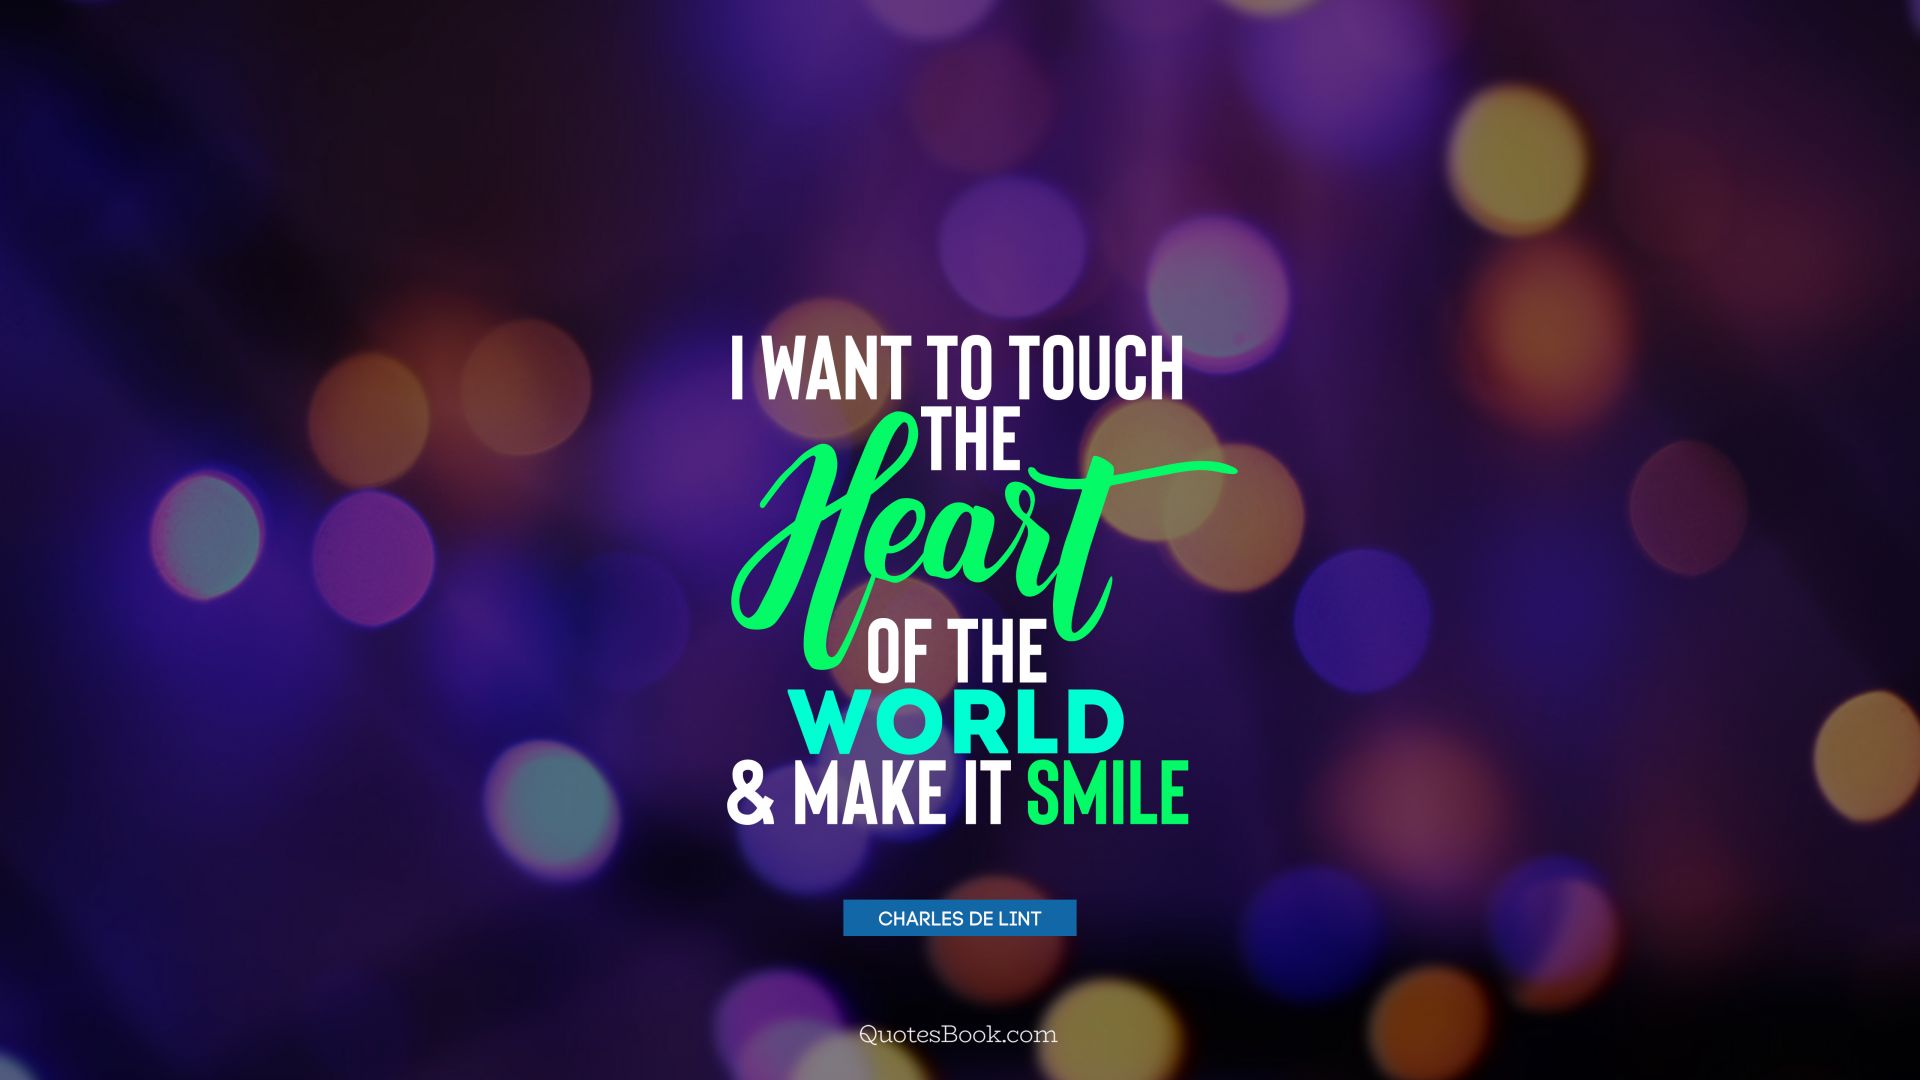 I want to touch the heart of the world and make it smile. - Quote by Charles de Lint